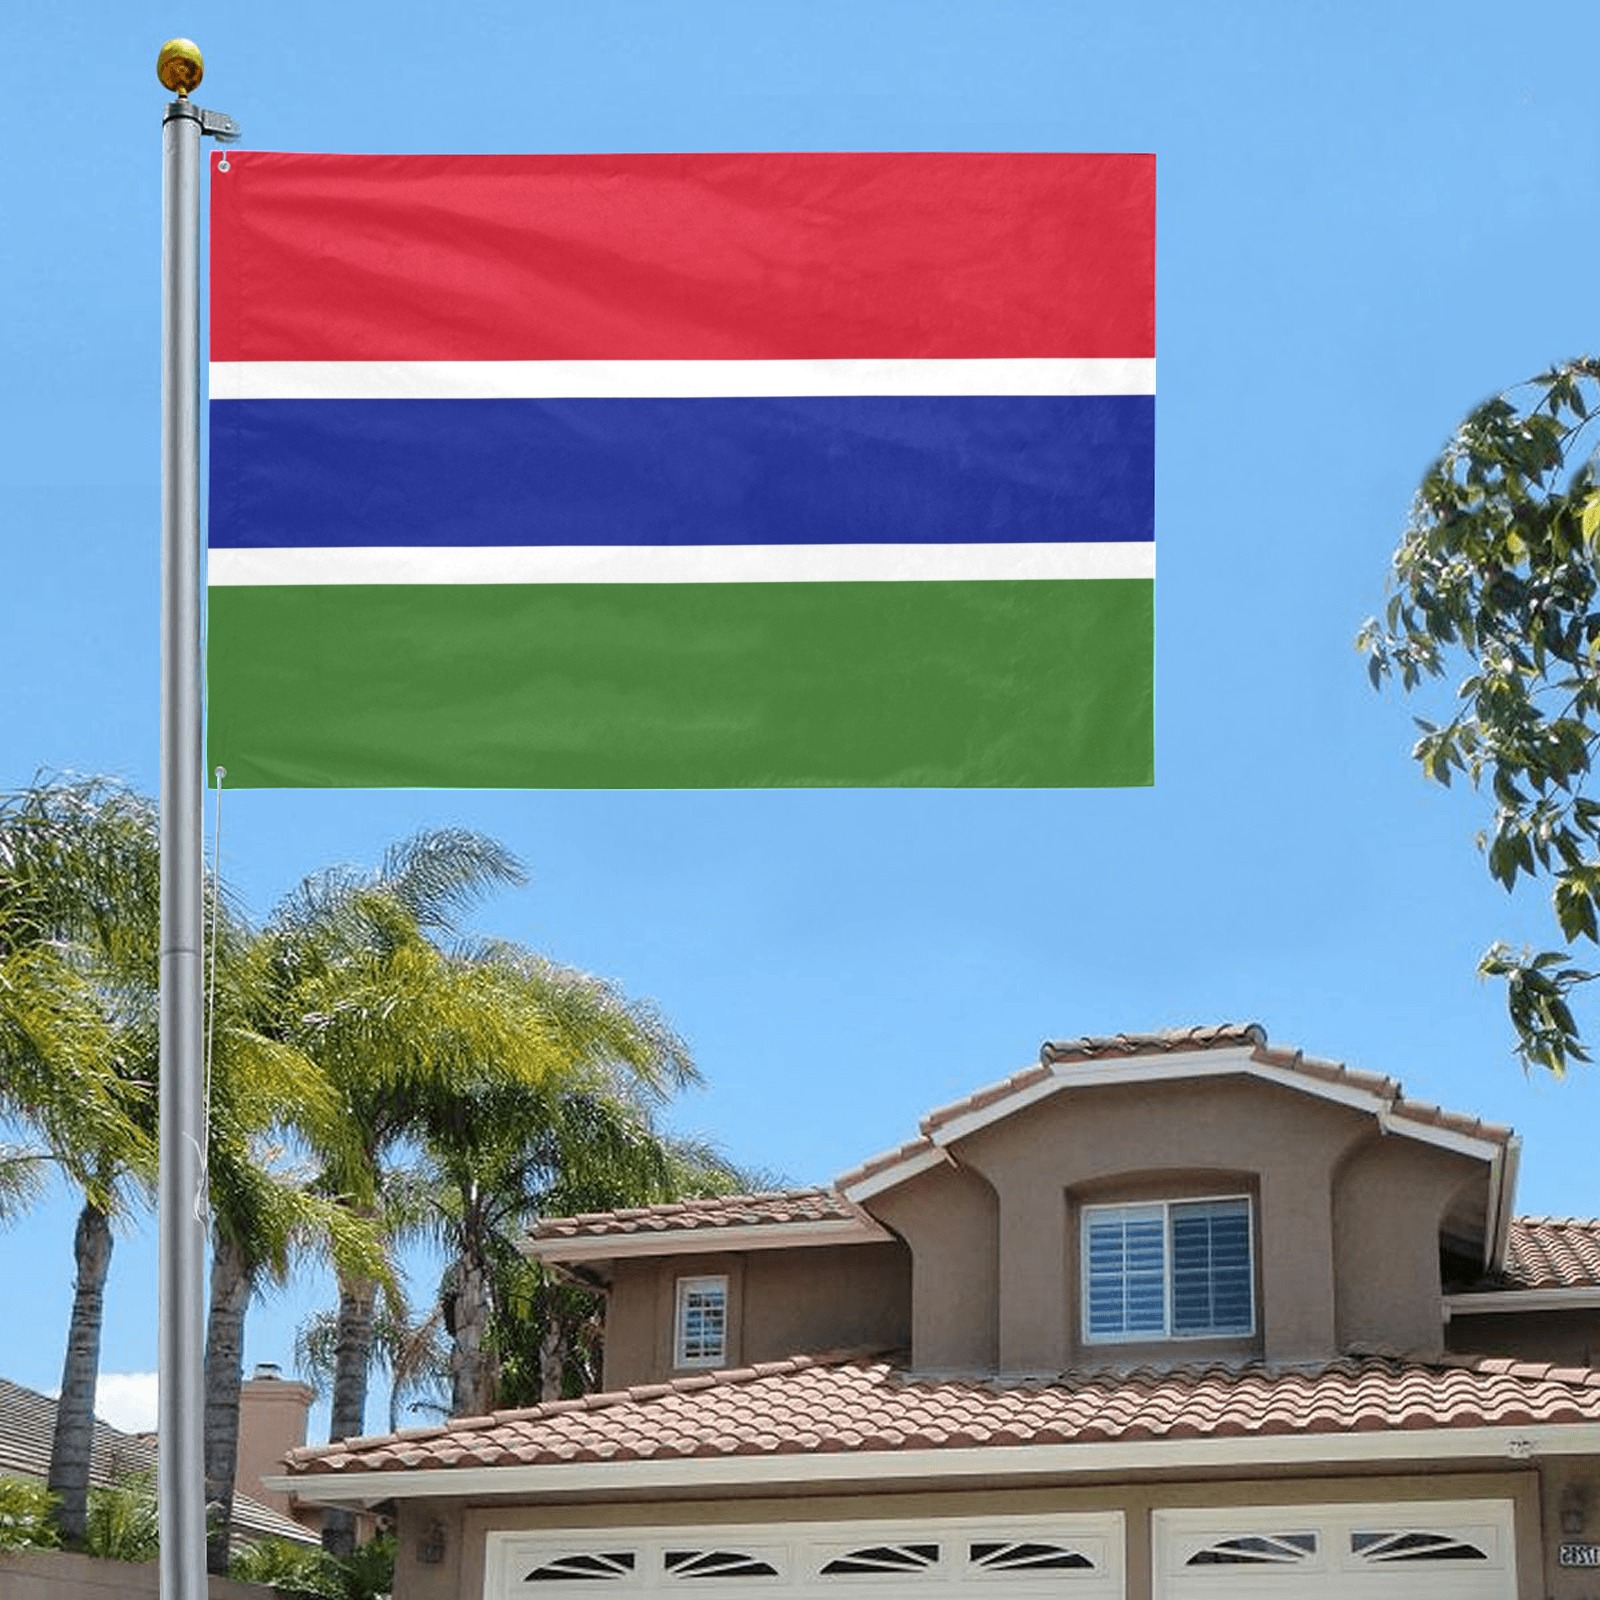 Gambia Flag Current Garden Flag 70"x47"